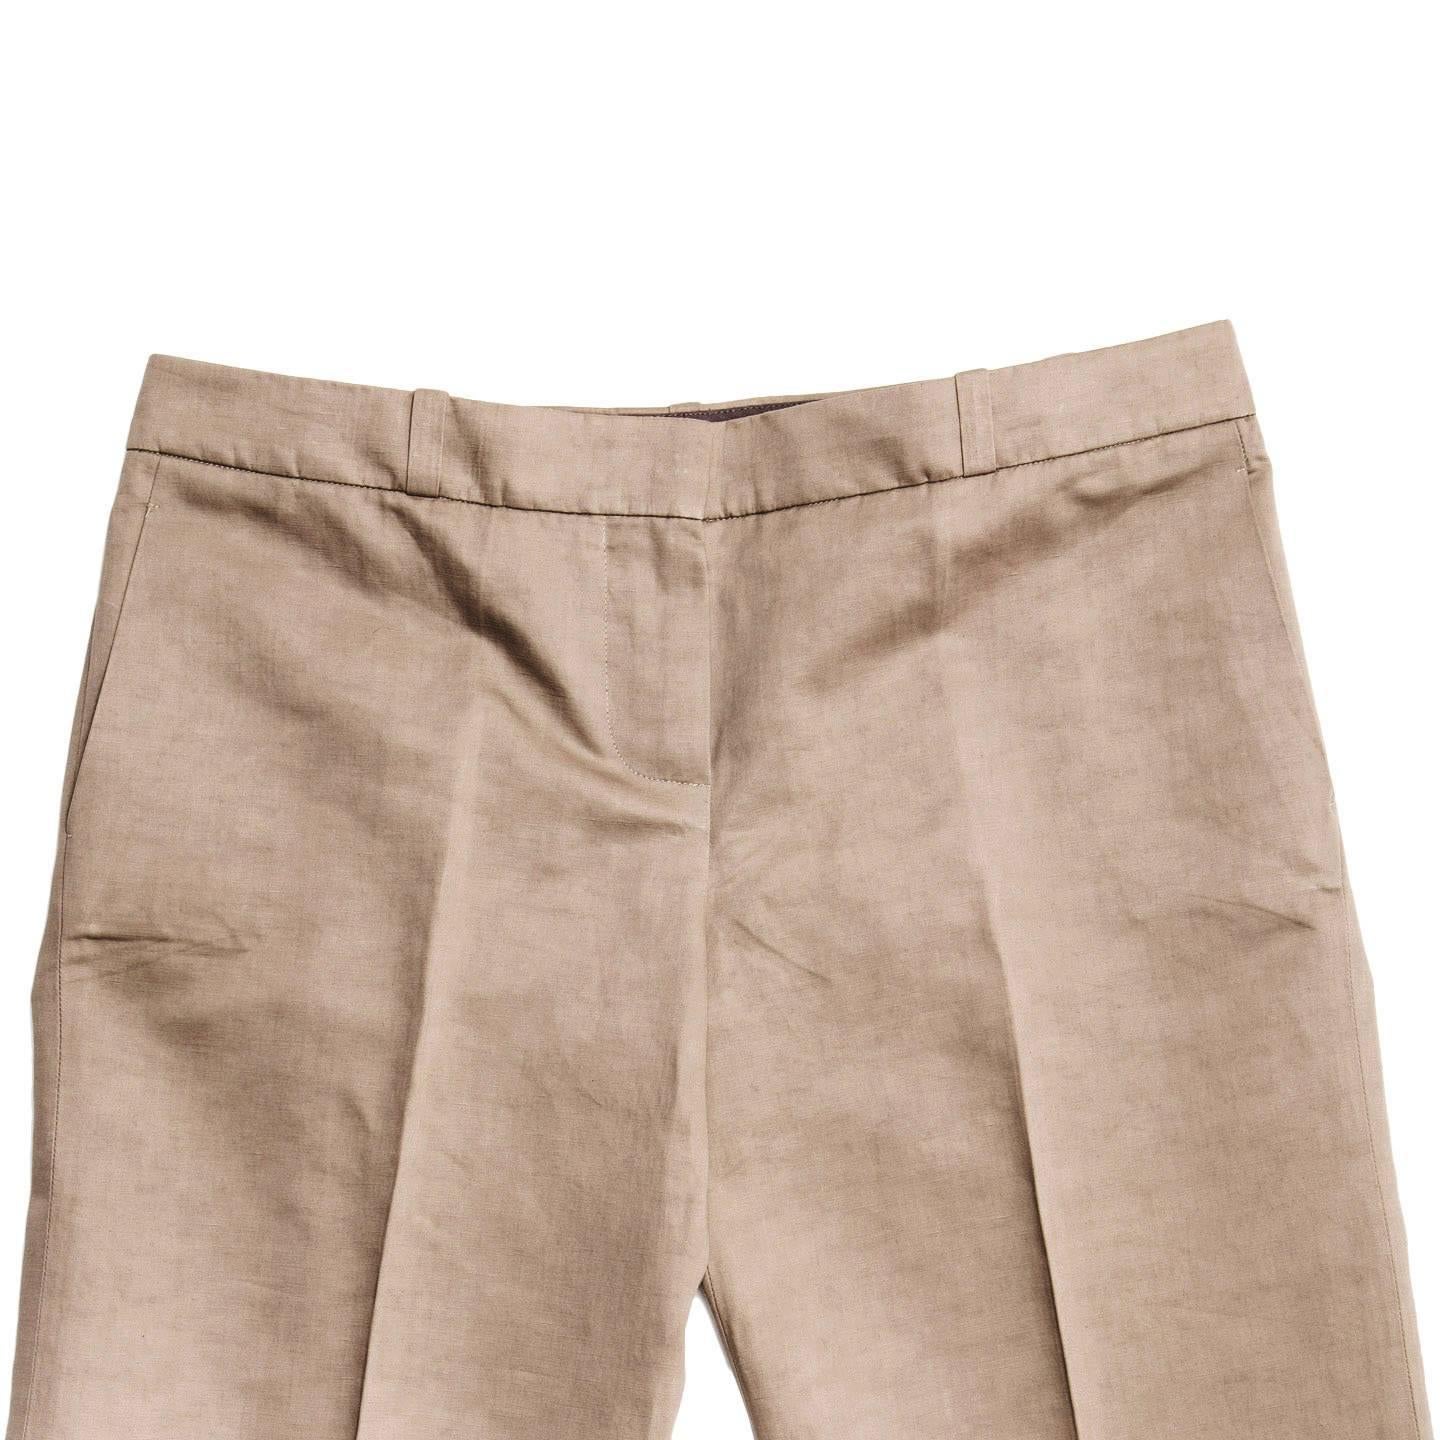 Chloe' Khaki Cotton Boot Legged Pants In New Condition For Sale In Brooklyn, NY